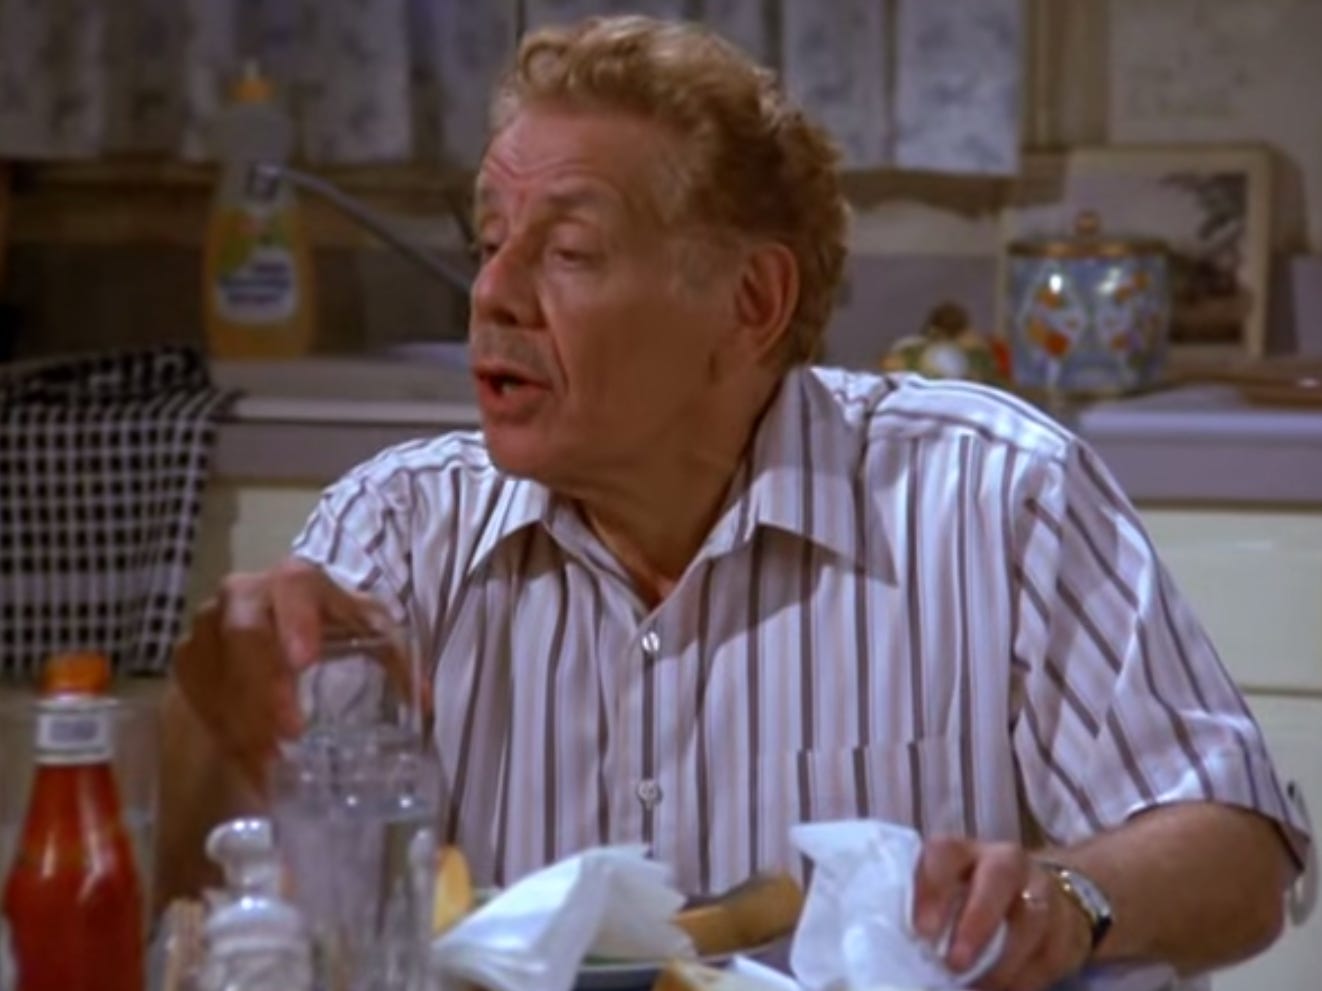 <p>Stiller gained a new following late in his career as George Costanza's long-suffering father and proponent of <a href="https://www.businessinsider.com/festivus-how-to-celebrate-2018-12">Festivus</a>, an anti-<a href="https://www.businessinsider.com/netflix-original-christmas-movies-ranked-2018-12">Christmas</a> celebration.</p><p>But his <a href="https://www.imdb.com/name/nm0005467/">late-career resurgence</a> came after years as one half of the comedy duo <a href="https://www.countryliving.com/life/inspirational-stories/a43442/jerry-stiller-and-anne-meara/">Stiller and Meara</a> with his wife of over 60 years, Anne Meara.</p>